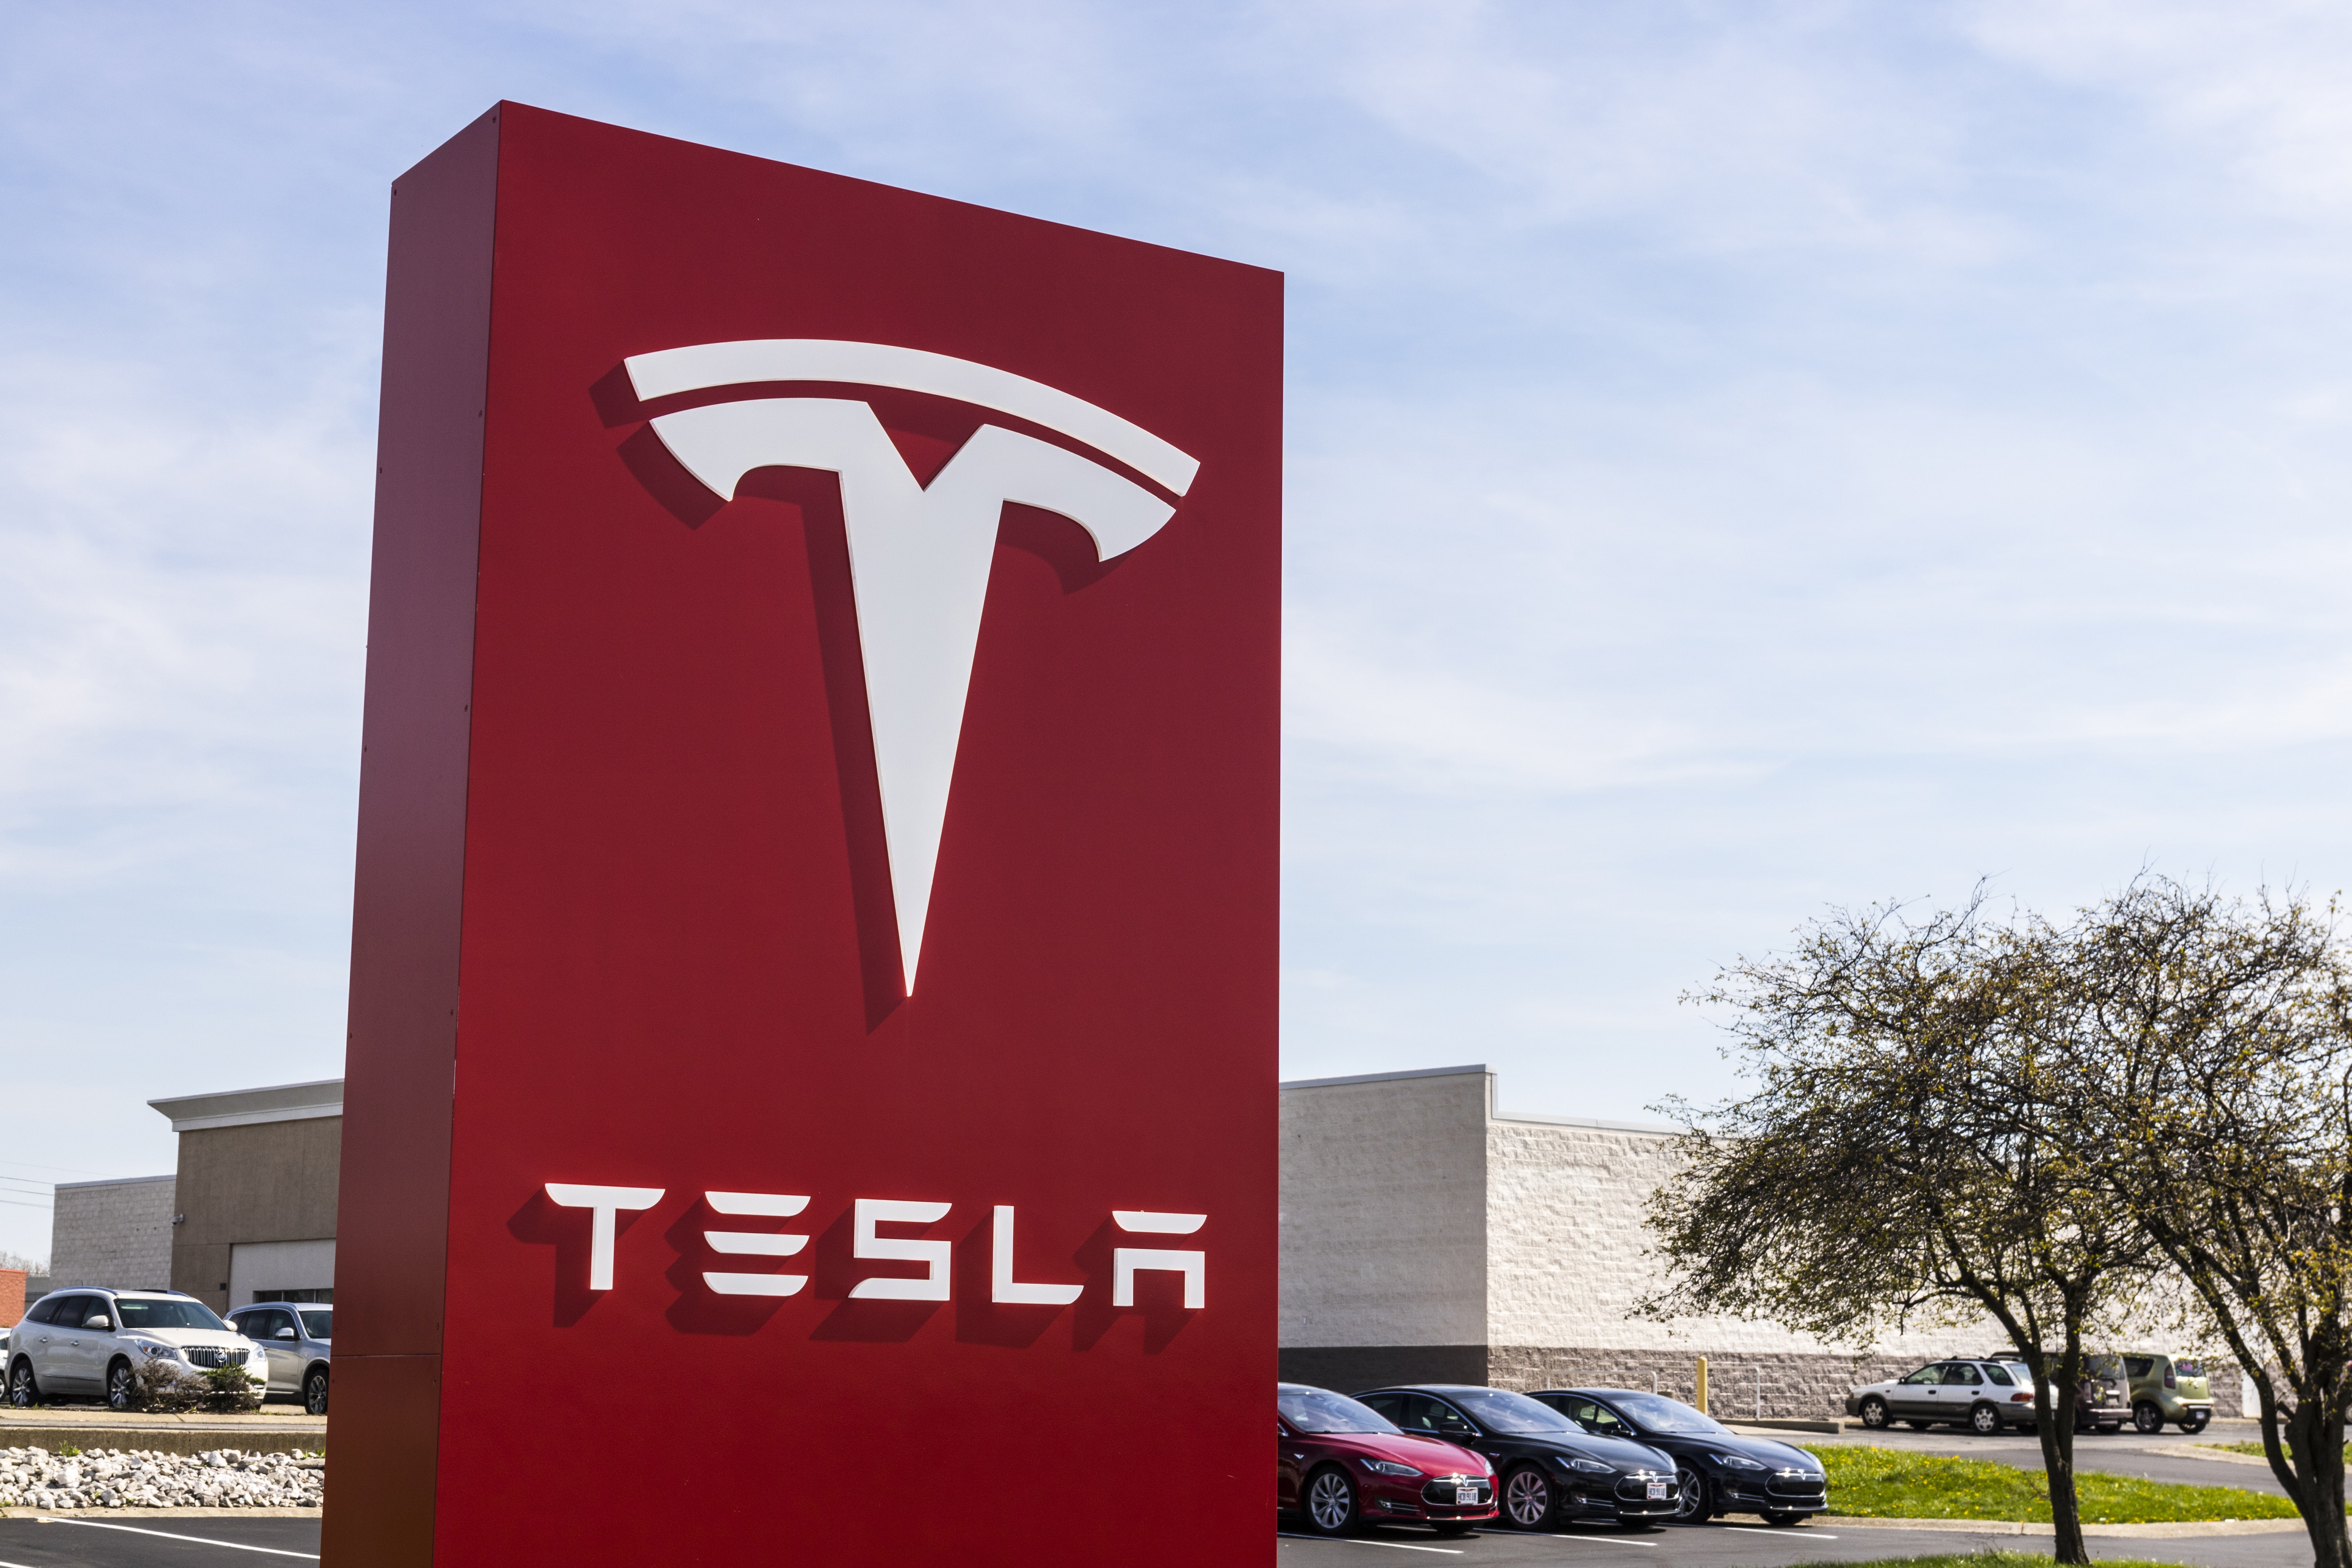 Tesla Bull Has This Suggestion To Lift Sagging Stock; Says EV-Maker Operating From Position Of 'Outstanding Financial Strength'